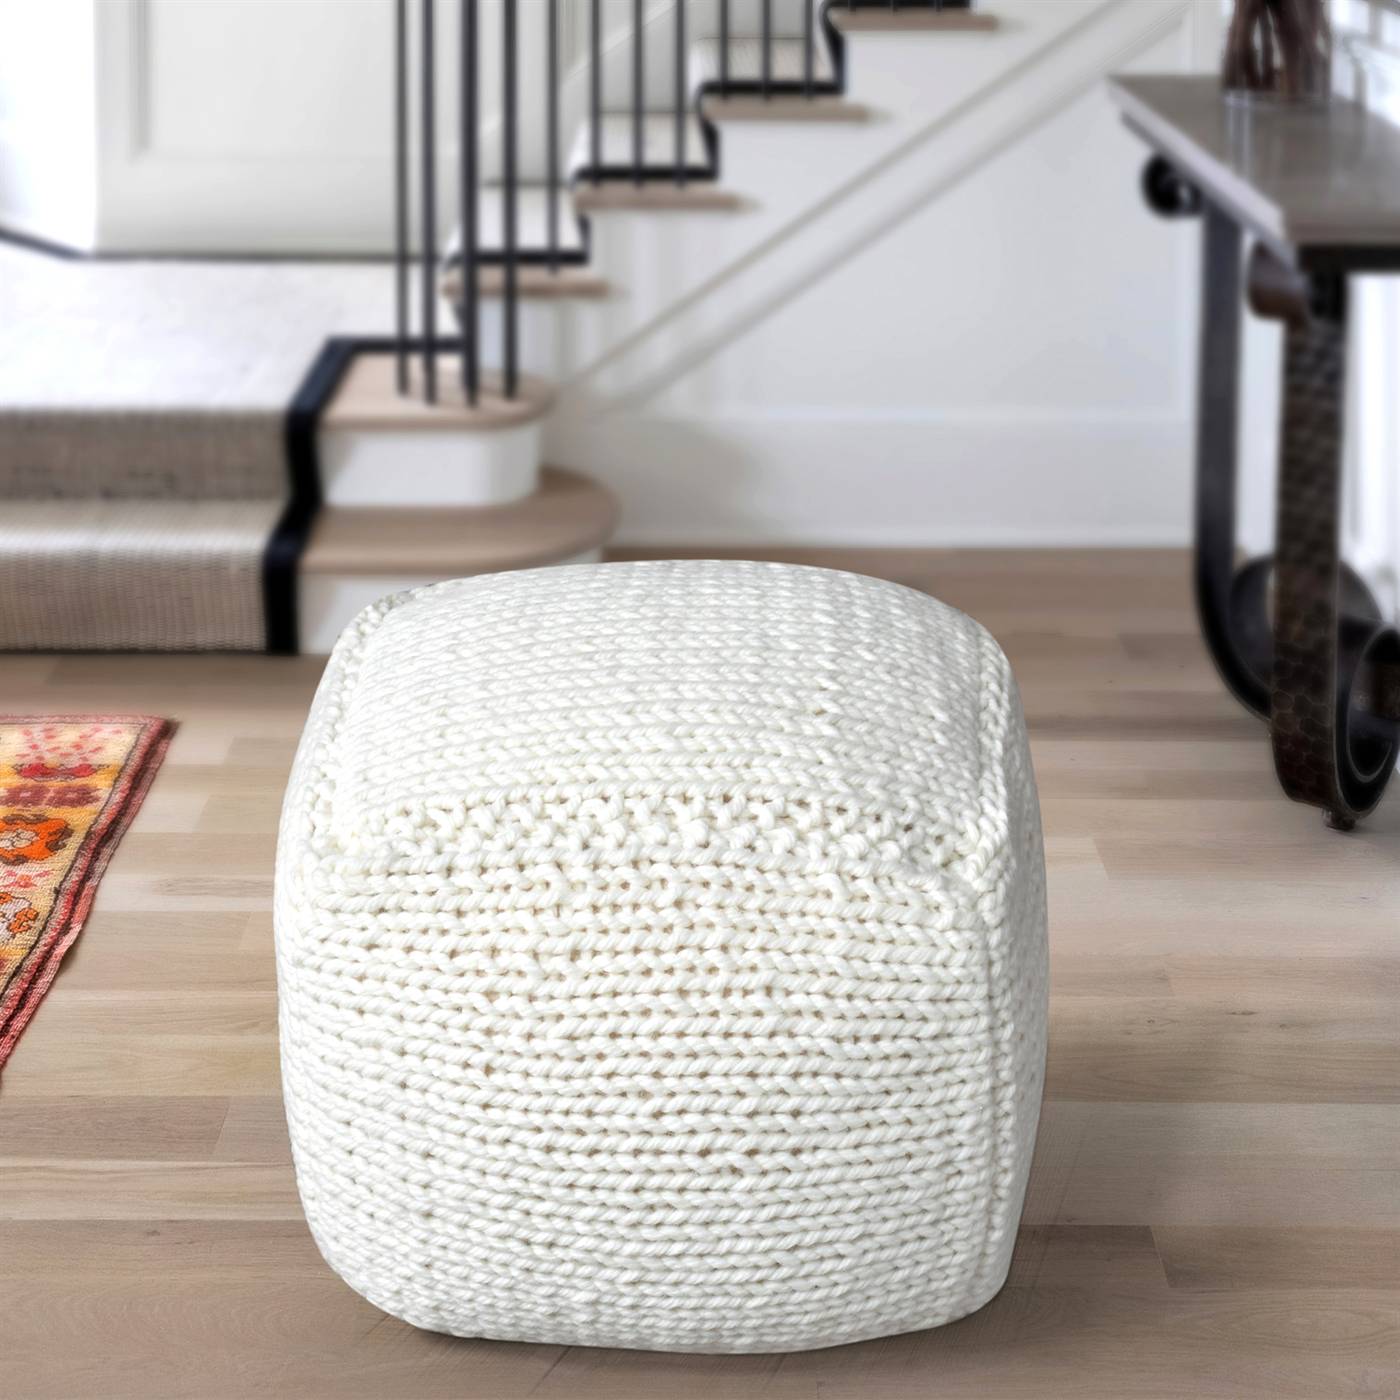 Wonore Pouf, 40x40x40 cm, Natural White, NZ Wool, Hand Knitted, Hm Knitted, Flat Weave